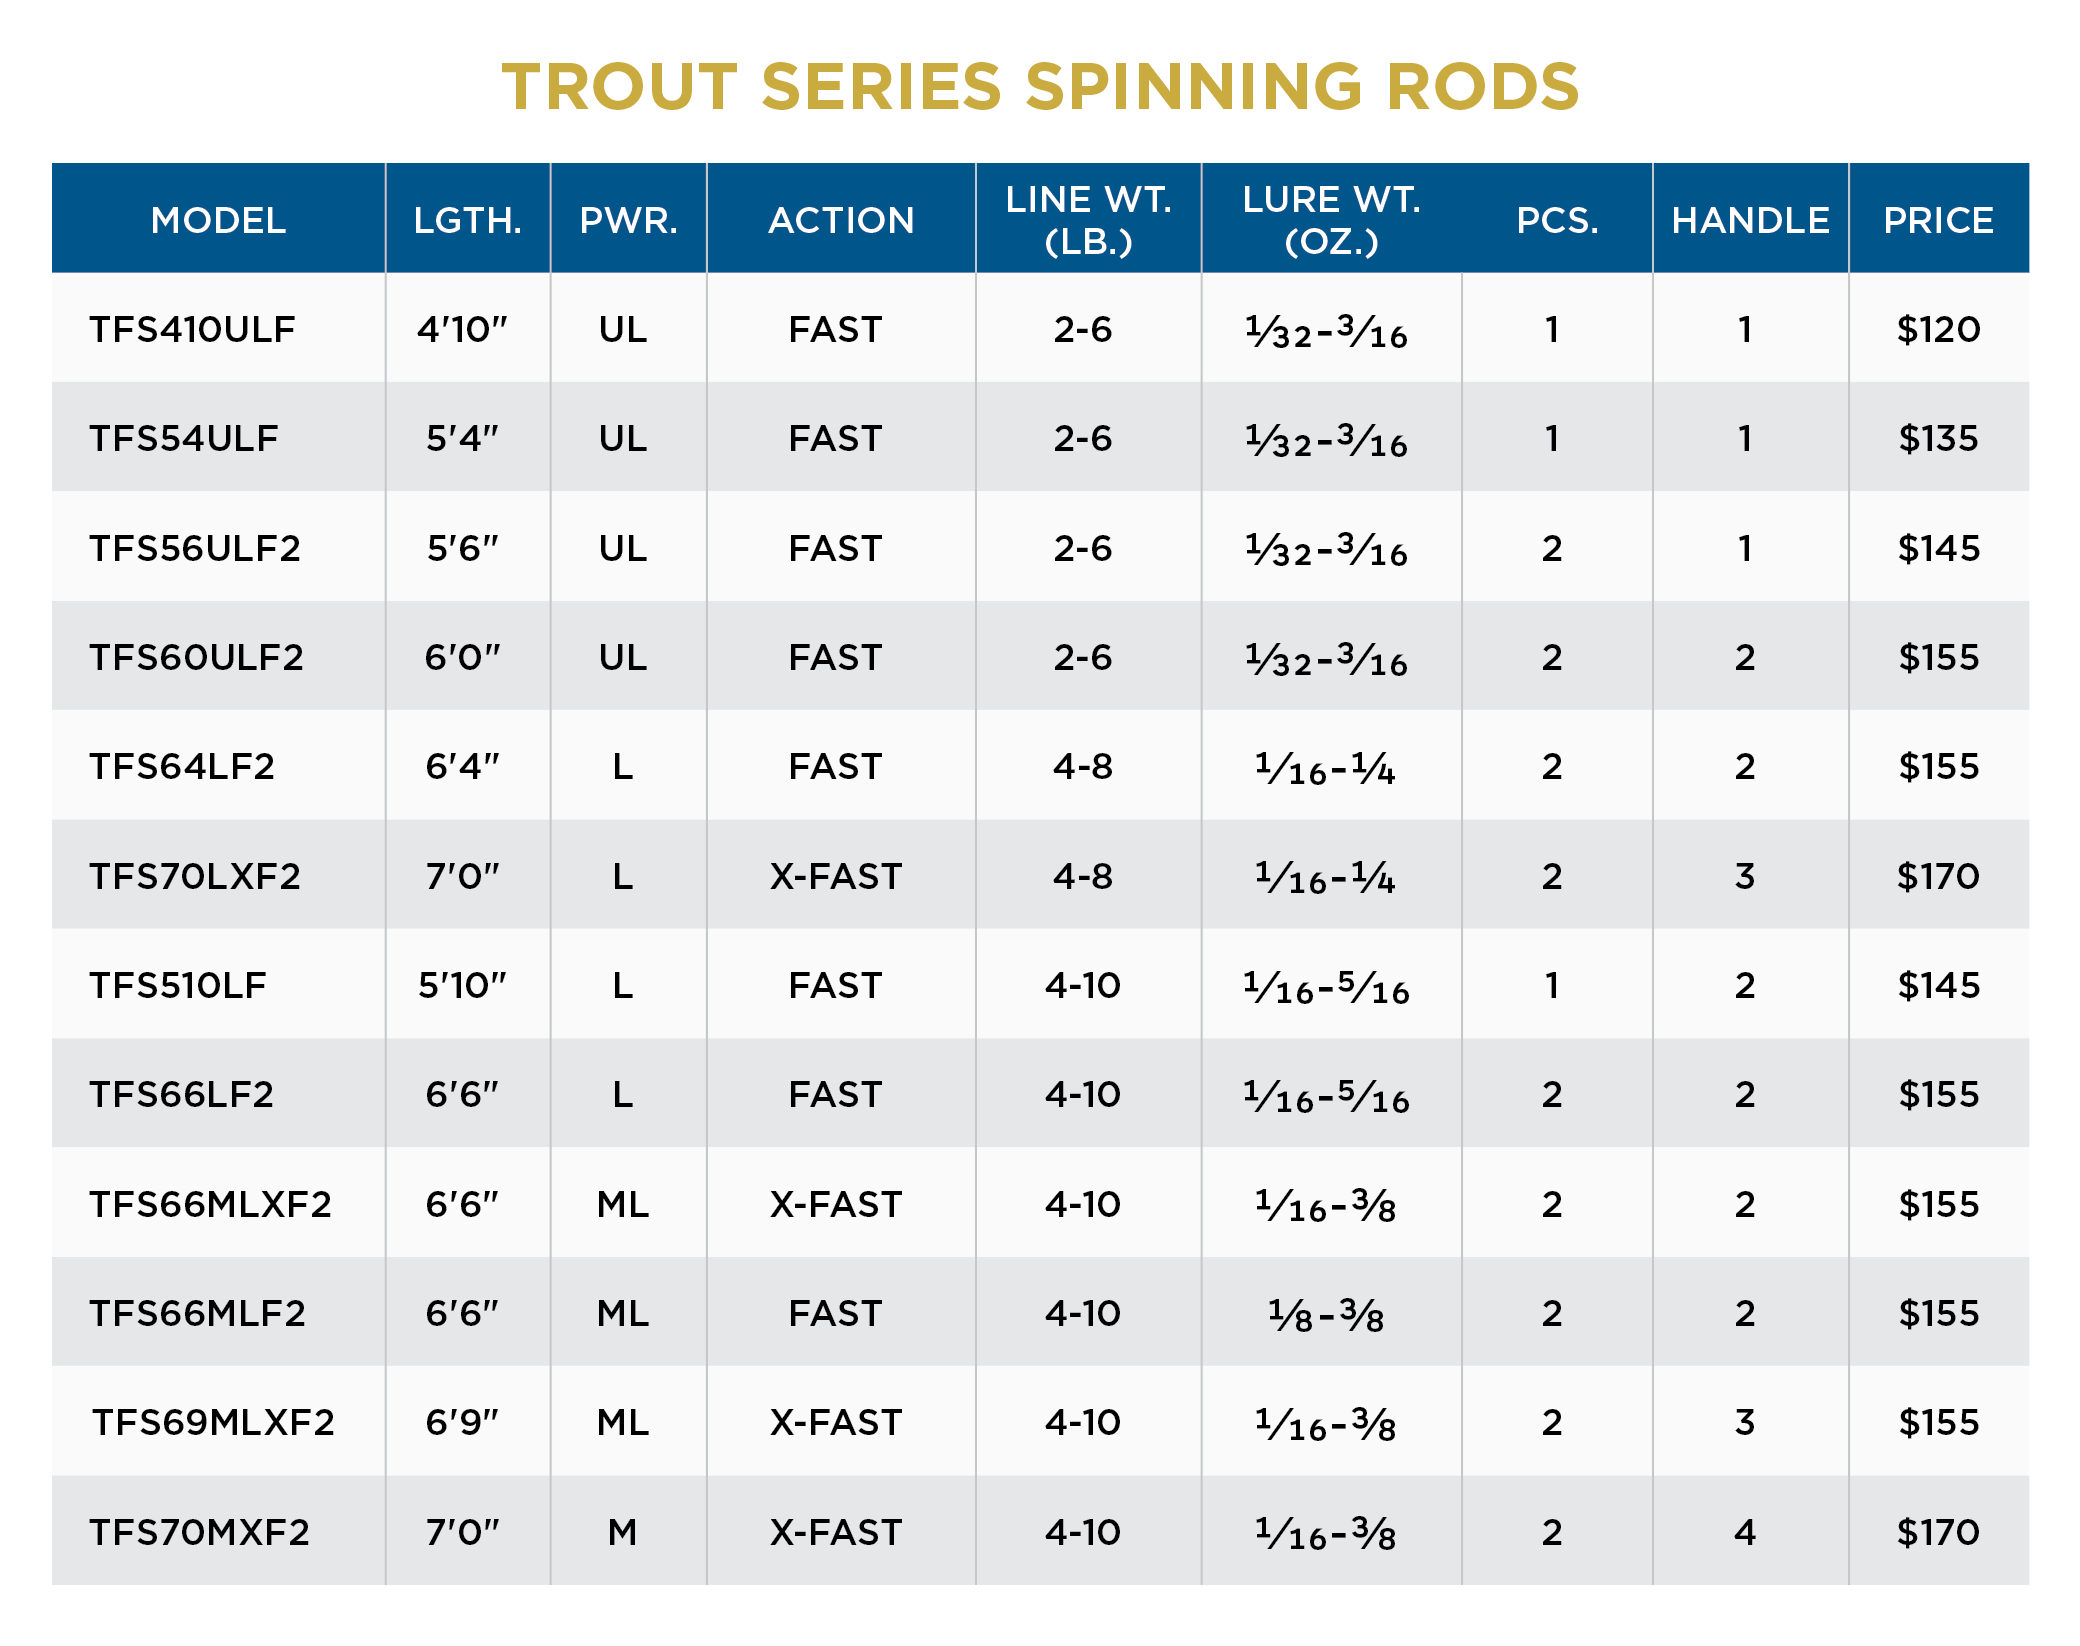 ST. CROIX TROUT SERIES SPINNING RODS - 0